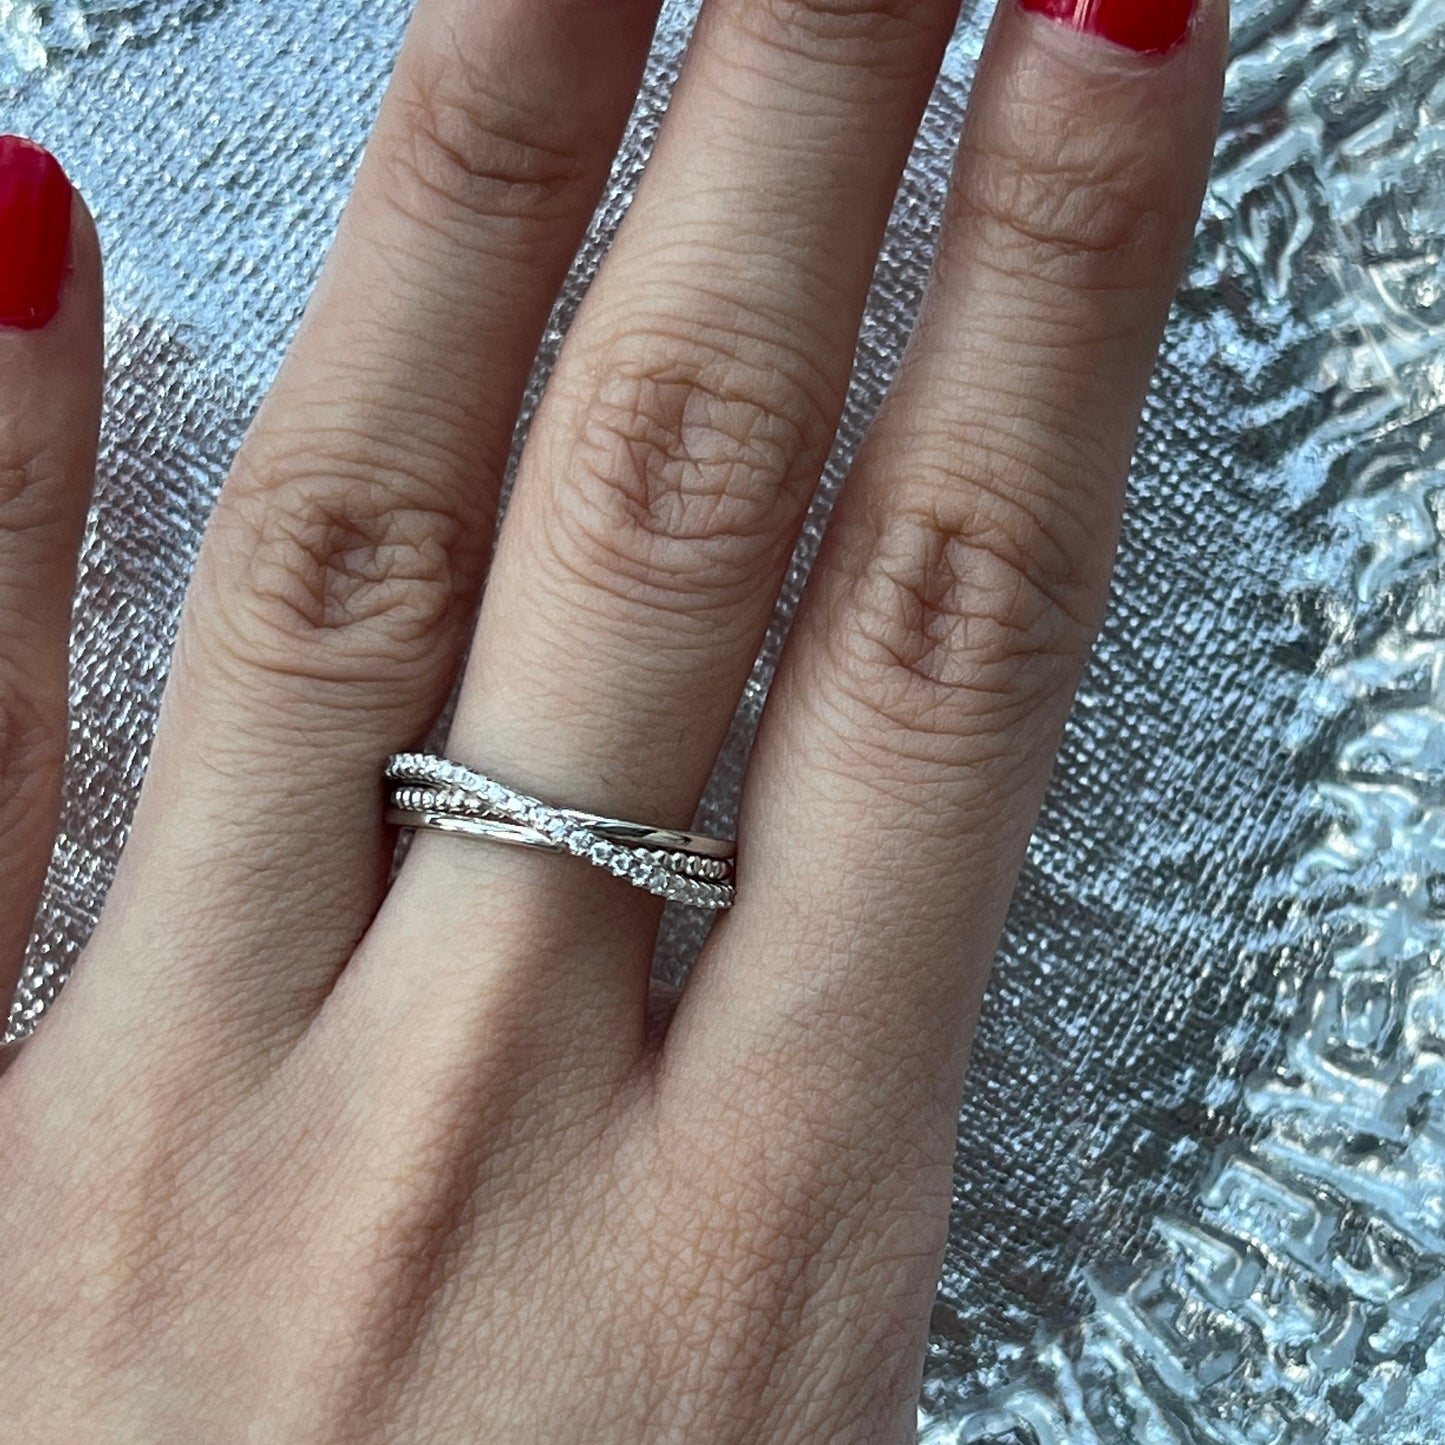 Infinity mobius ring, 925 silver ring, Twist interlocking, Trinity cz ring, Wedding bridal band, Eternity forever ring, Anniversary gifts